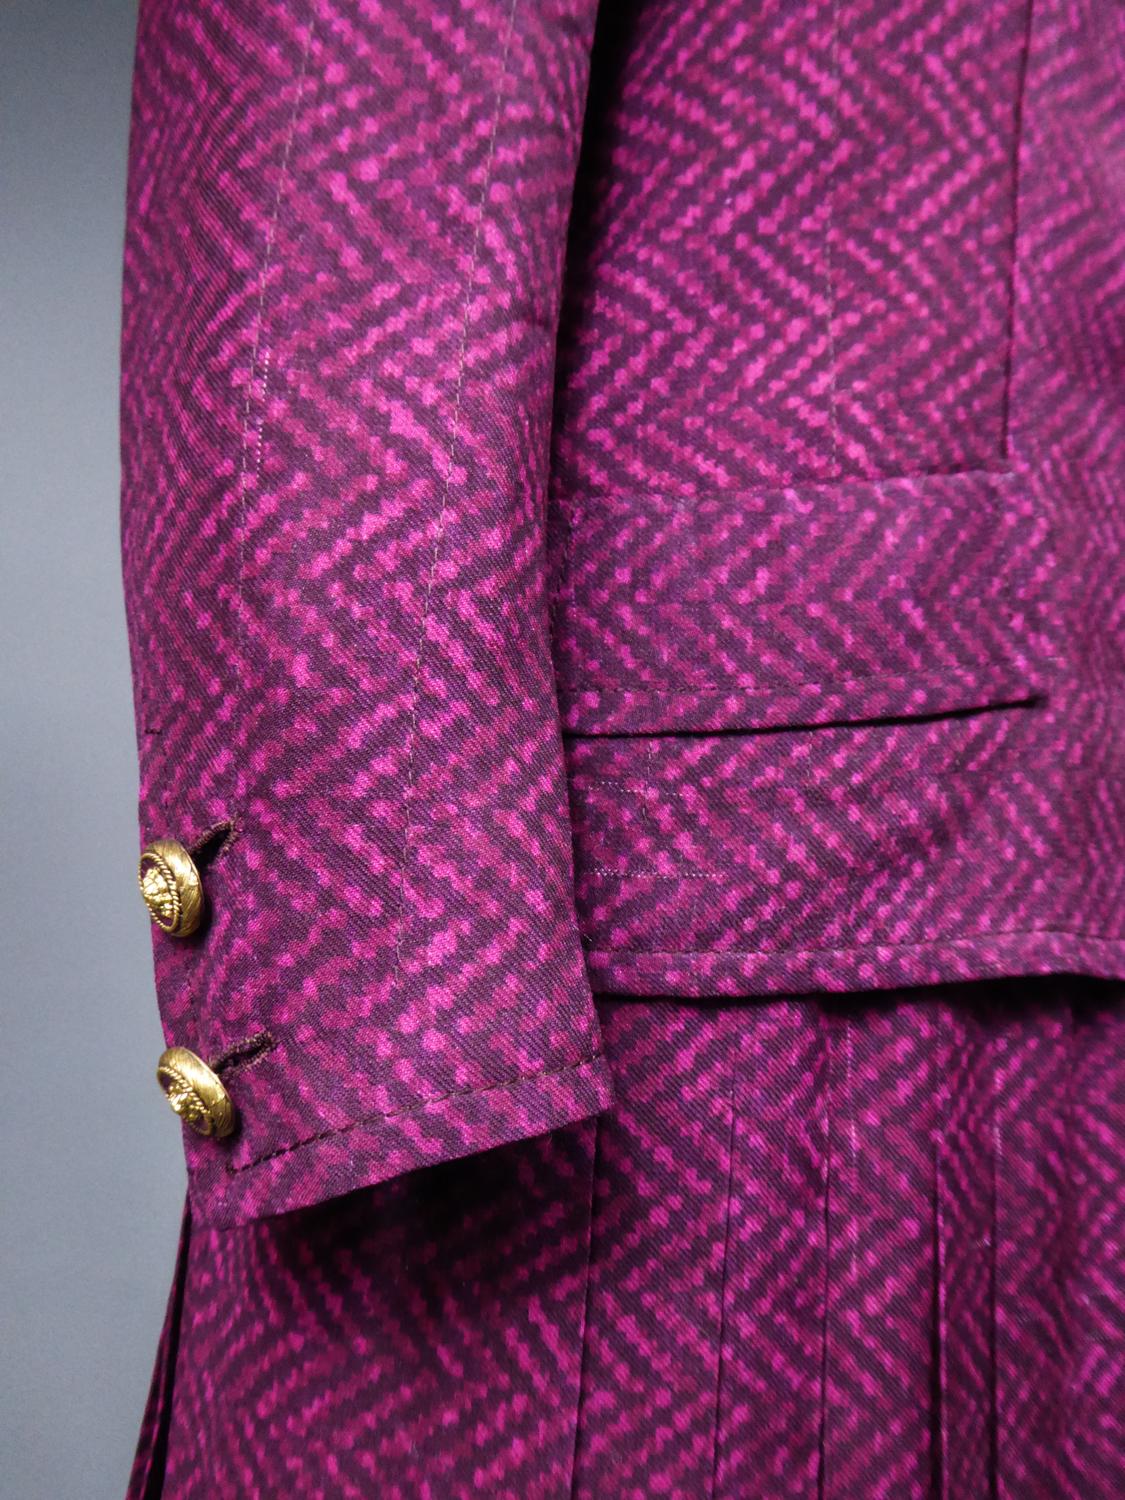 A French Couture Silk Chanel Skirt and Jacket Suit number 60423 & 60422 C. 1980 For Sale 4